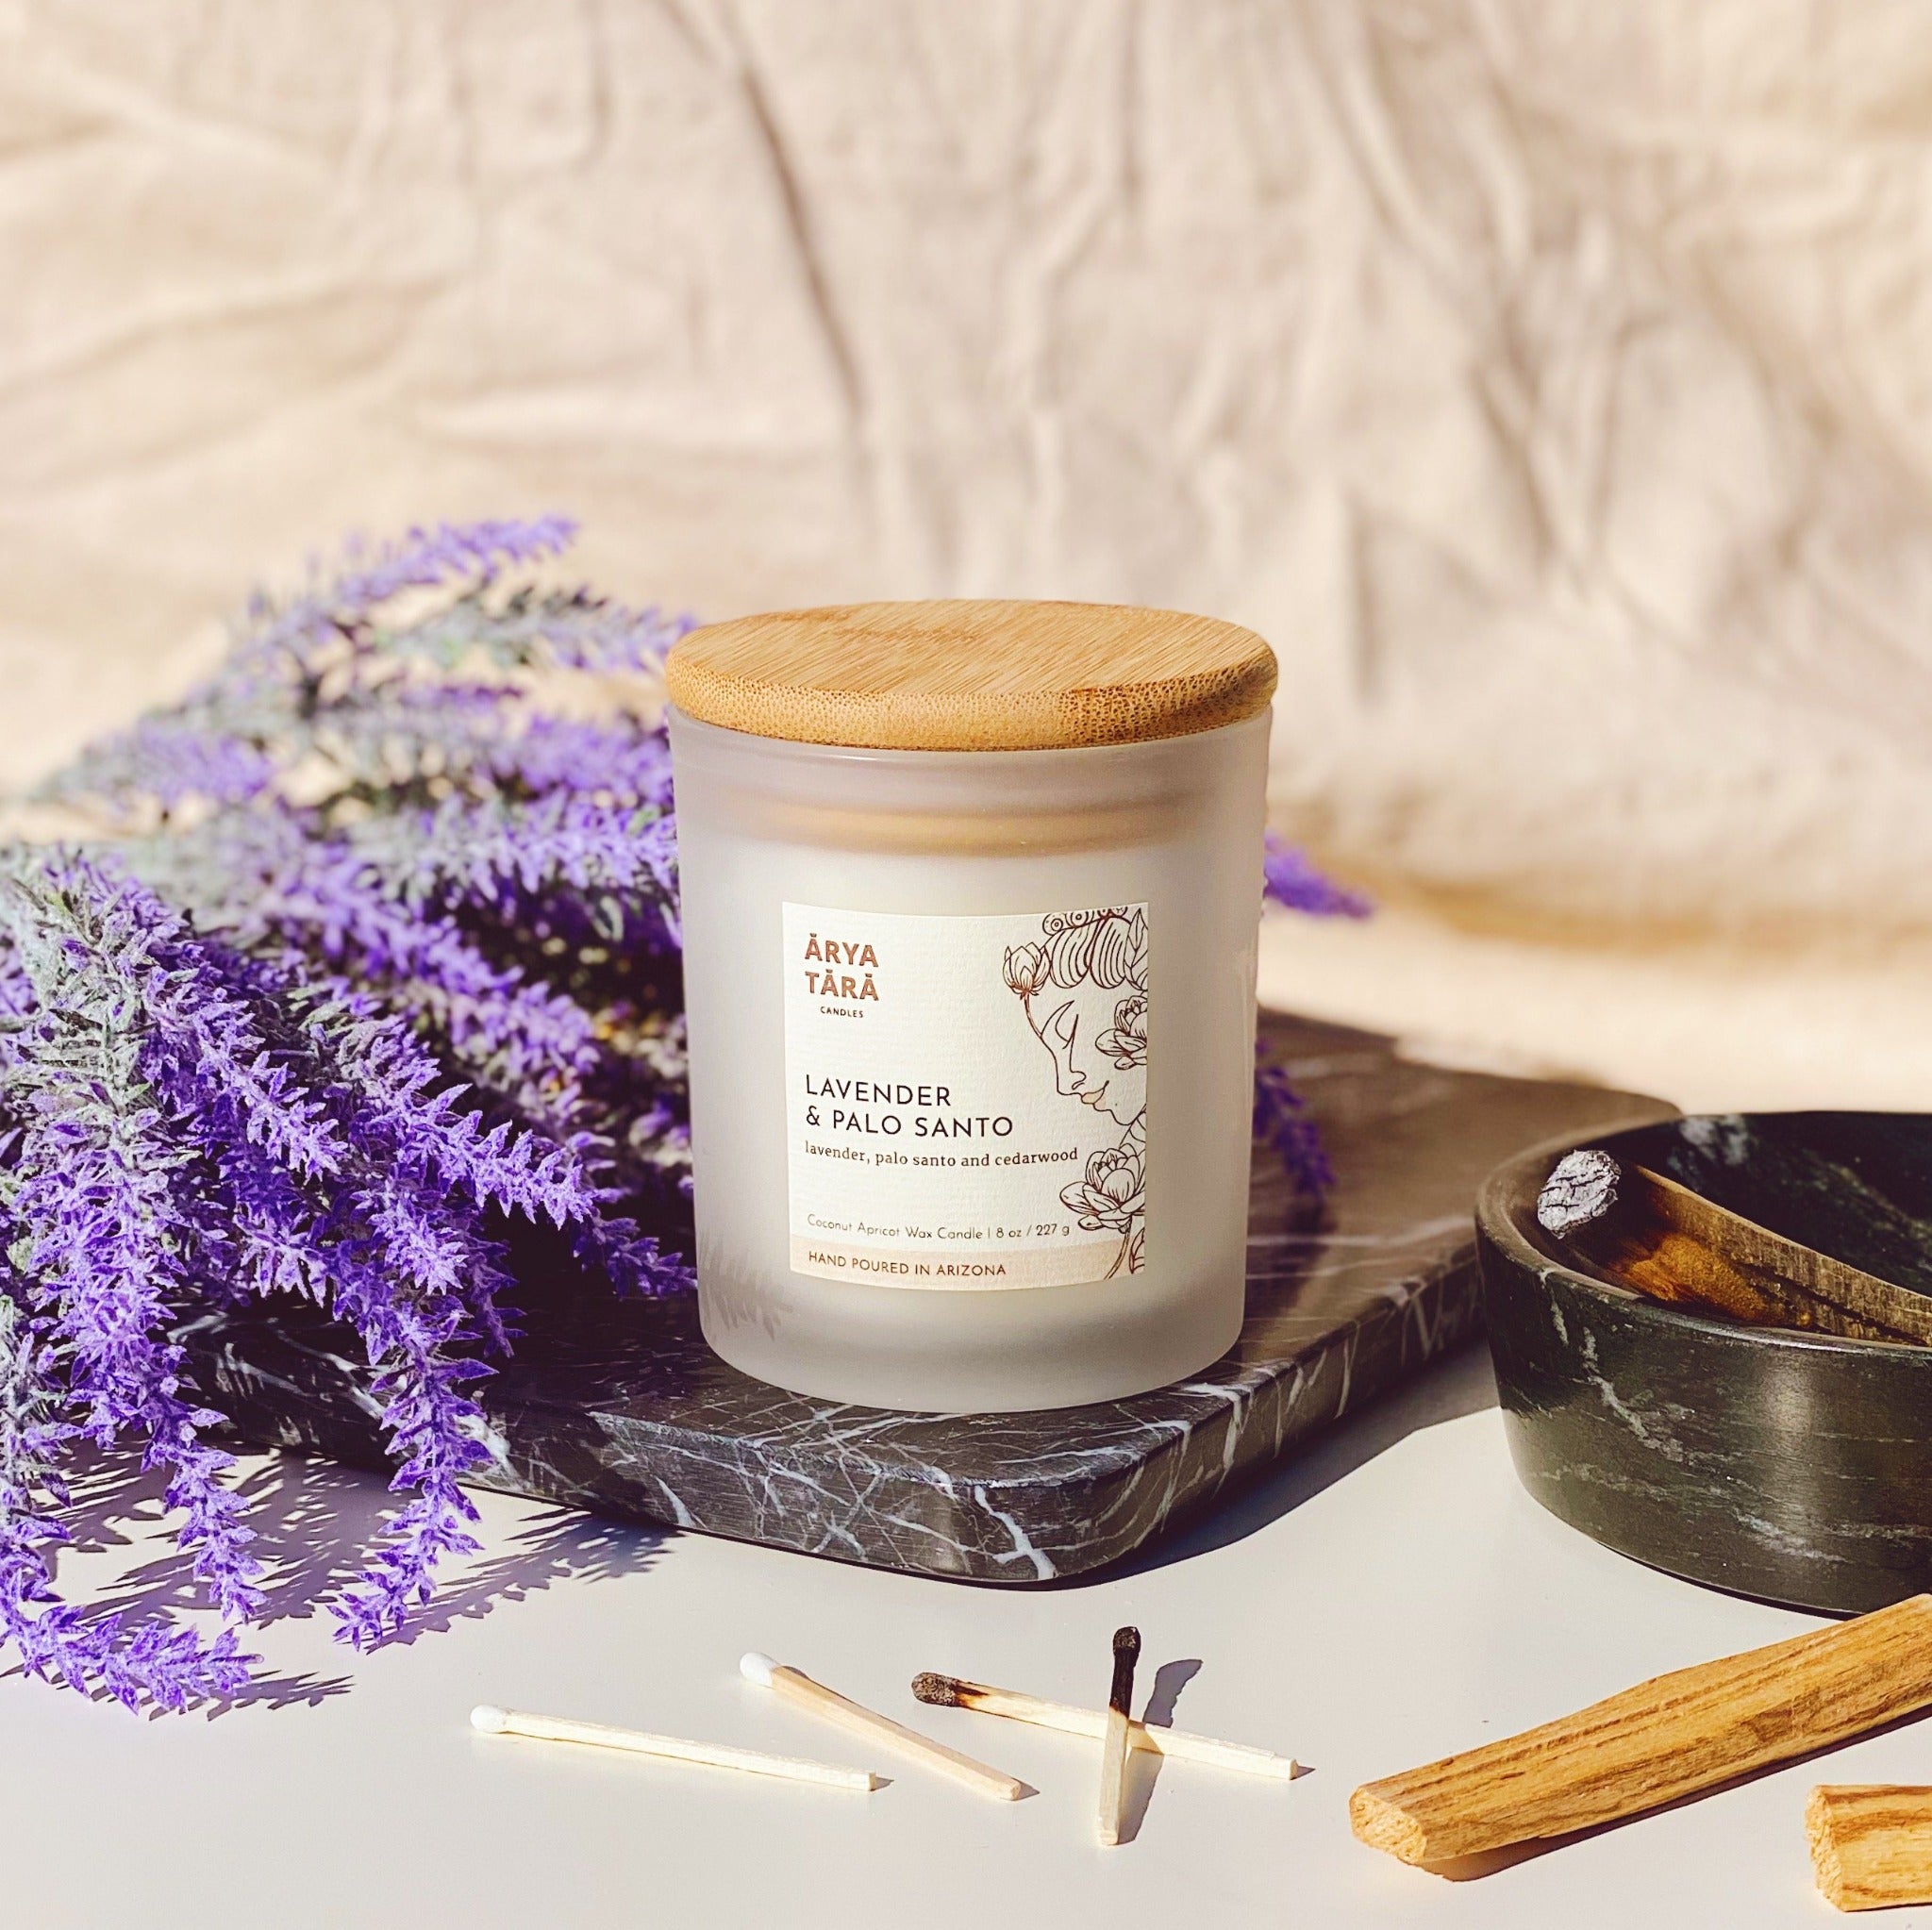 Lavender and Palo Santo Candle by Arya Tara Candles. Provence lavender, palo santo and Atlas cedarwood. French lavender and South American palo santo scented candle. Non-toxic natural candle made with coconut apricot wax, lead-free zinc-free wicks, premium fragrances. Luxury candle, natural candle. Made in Tucson Arizona, hand poured candle in small batch.